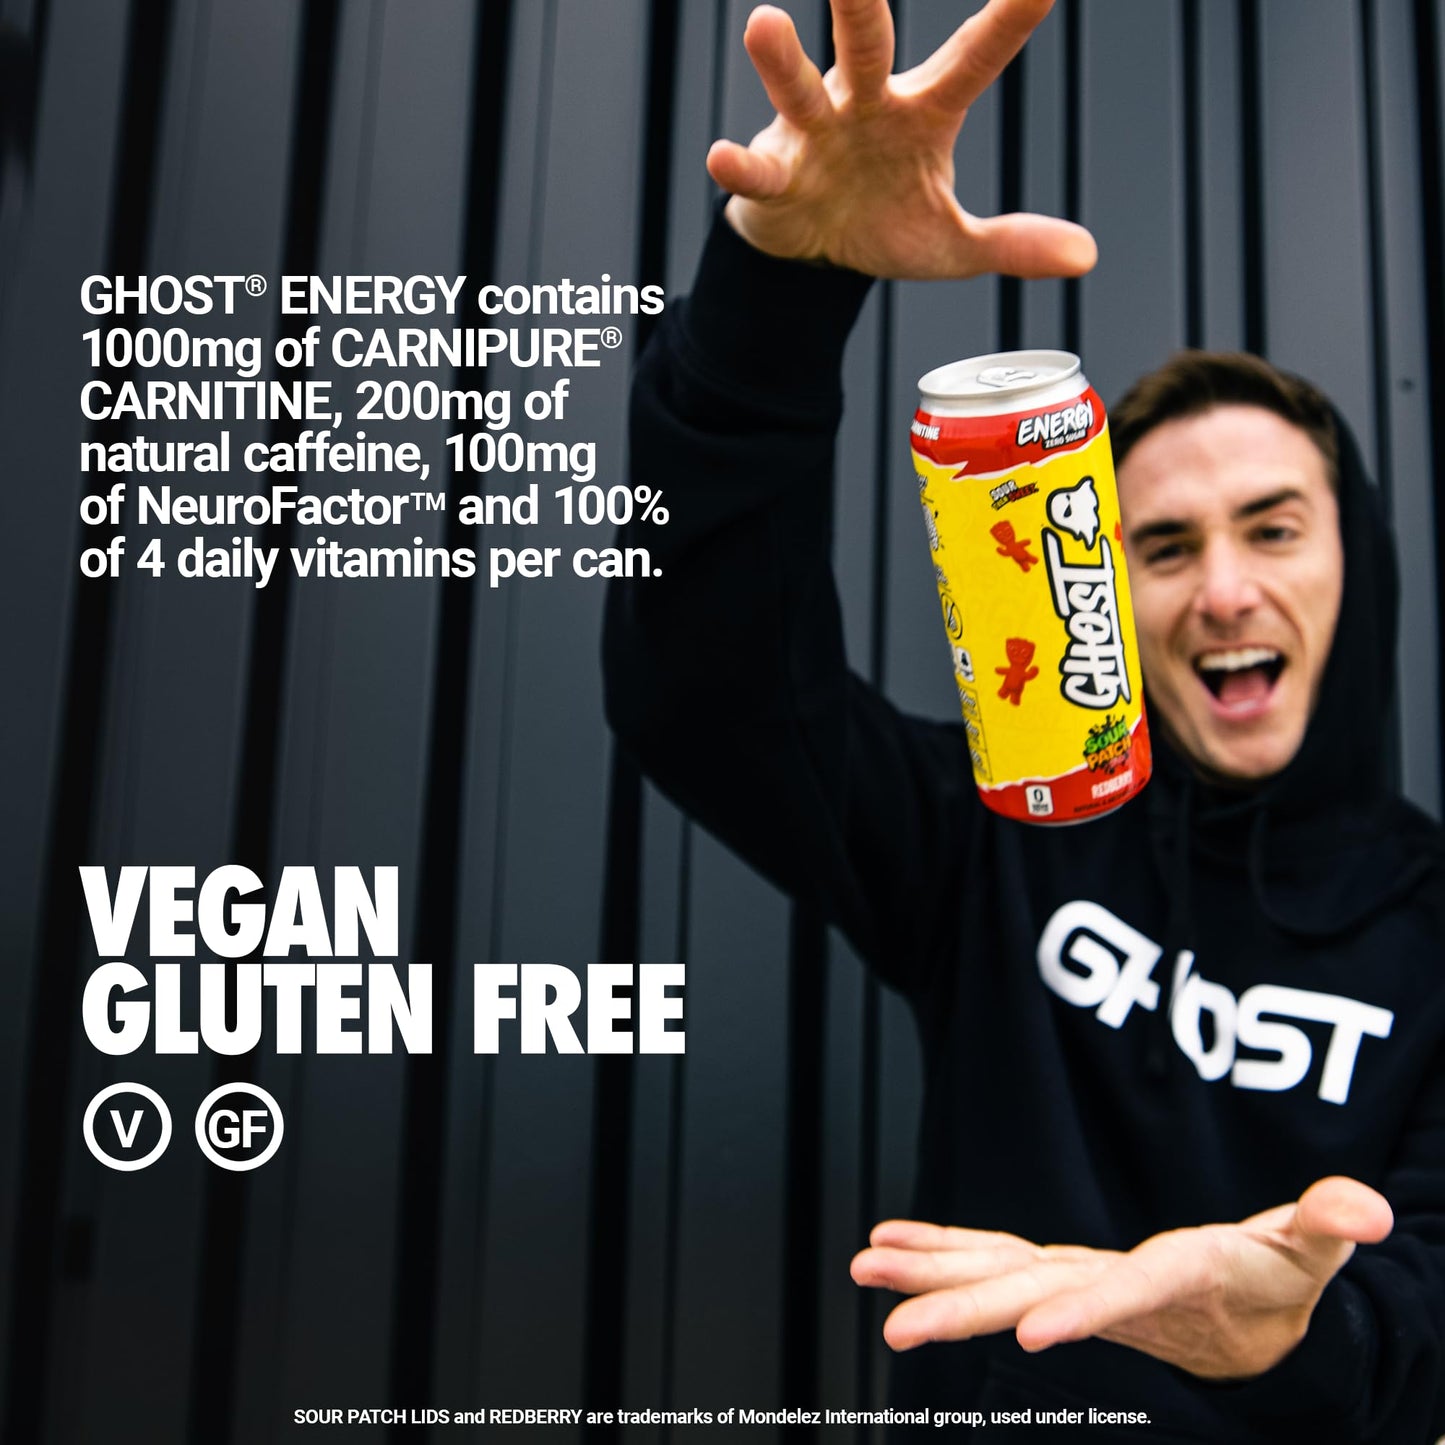 GHOST Energy Drink - 12-Pack, Sour Patch Kids Redberry, 16oz - Energy & Focus & No Artificial Colors - 200mg of Natural Caffeine, L-Carnitine & Taurine - Gluten-Free & Vegan